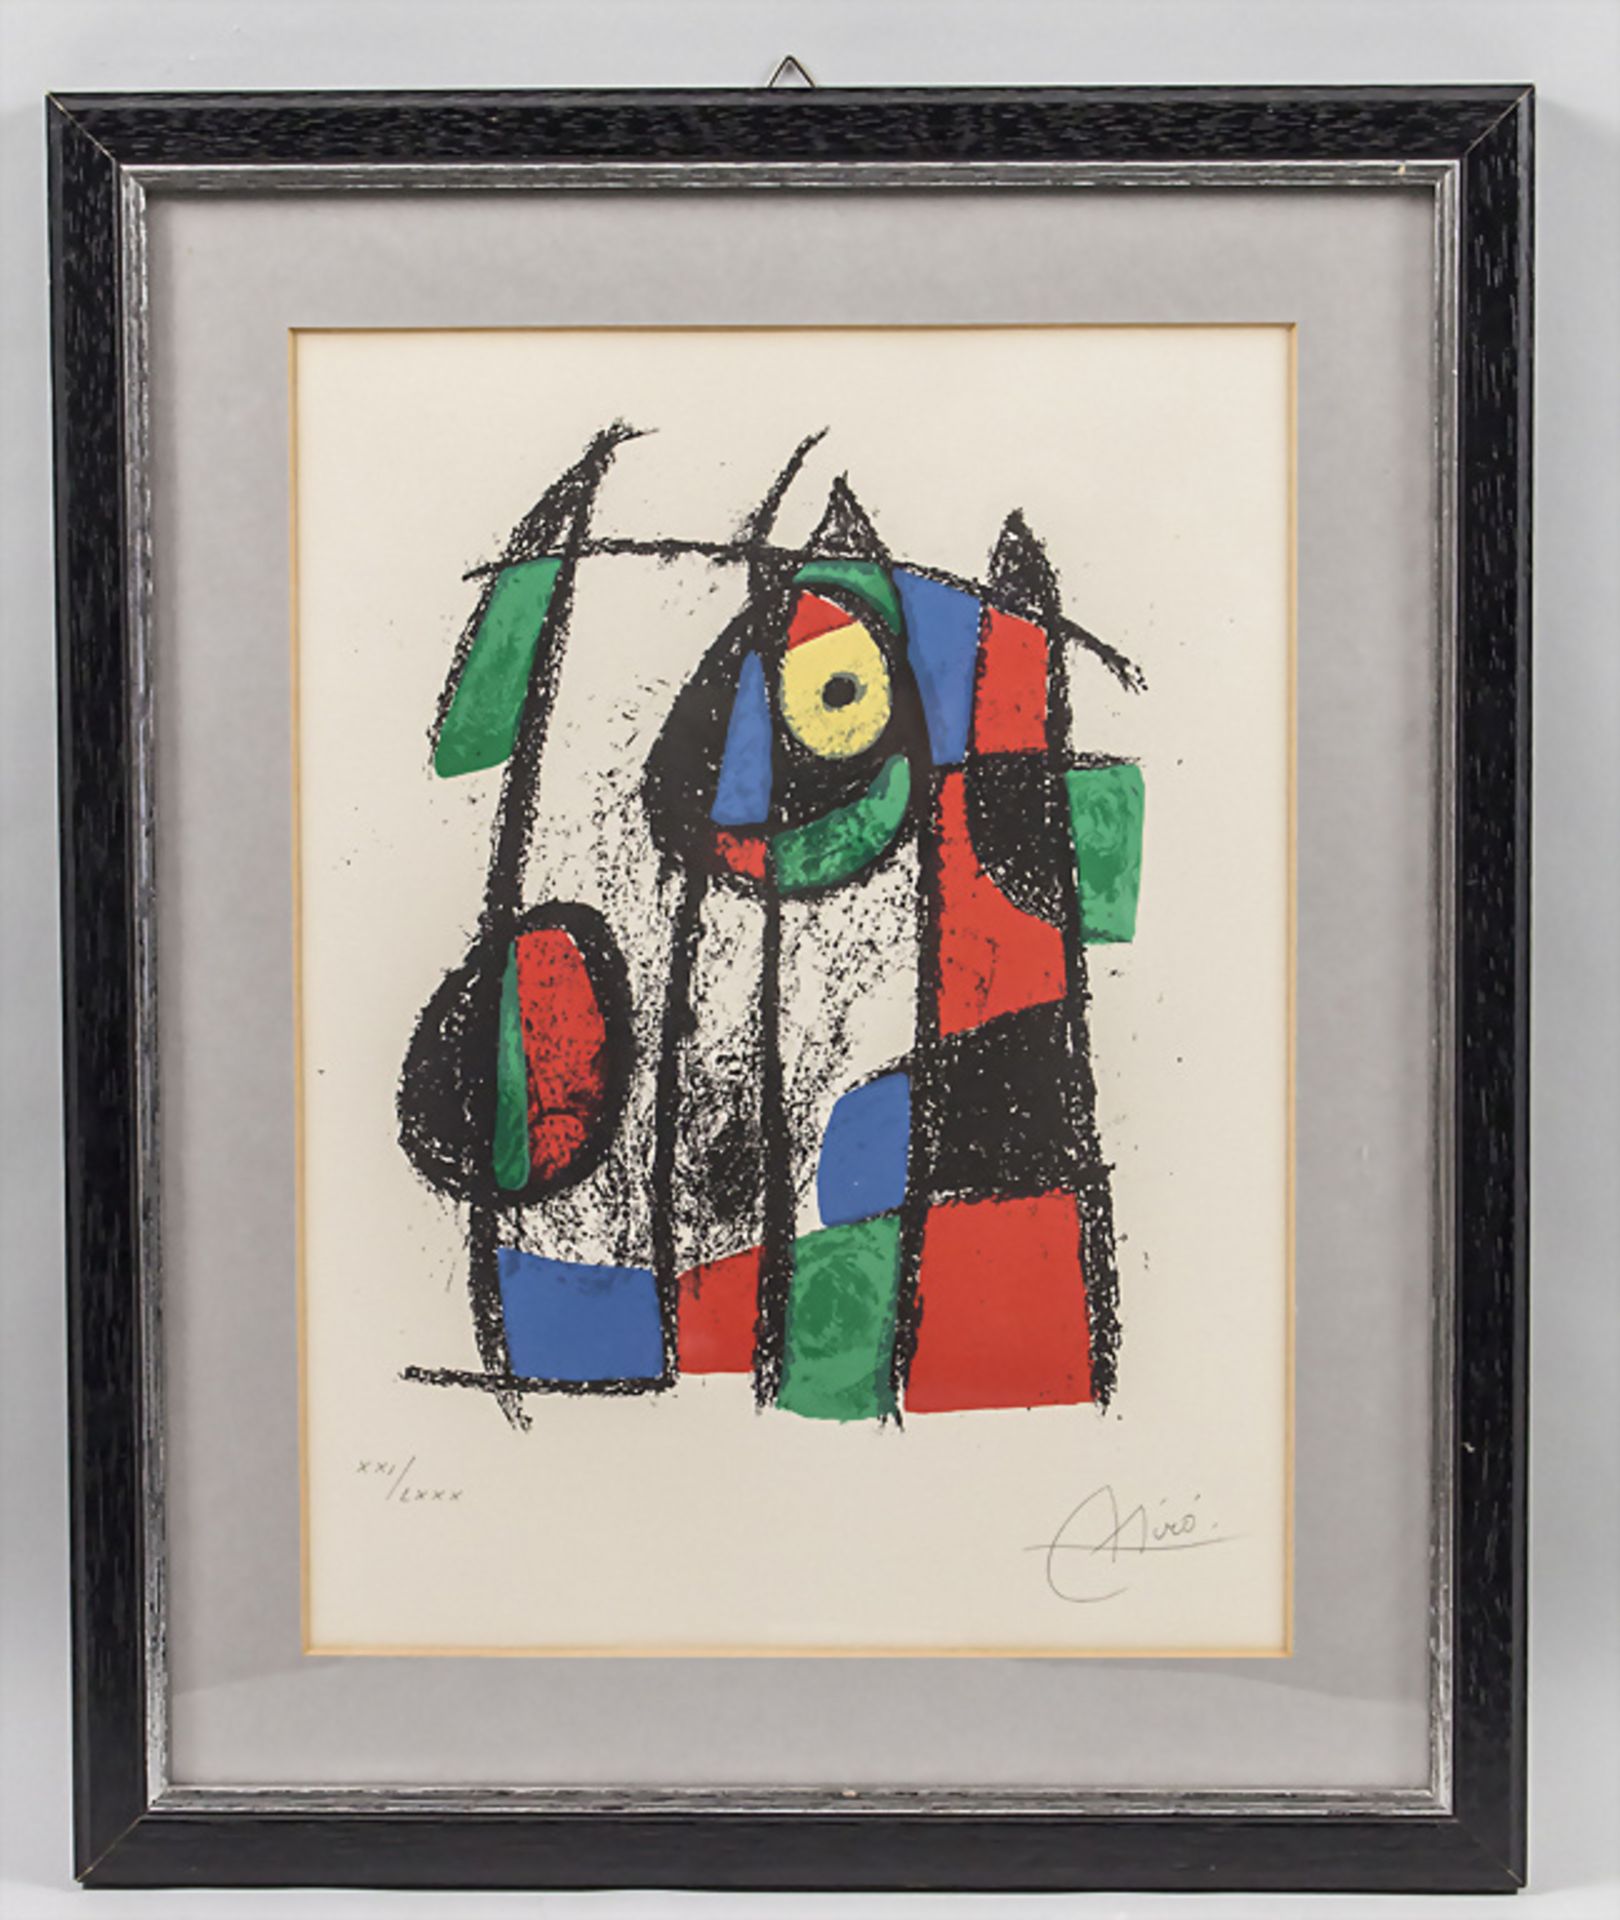 Joan MIRO (1893-1983), 'Komposition' or 'The curious cat', 1975 - Image 2 of 5